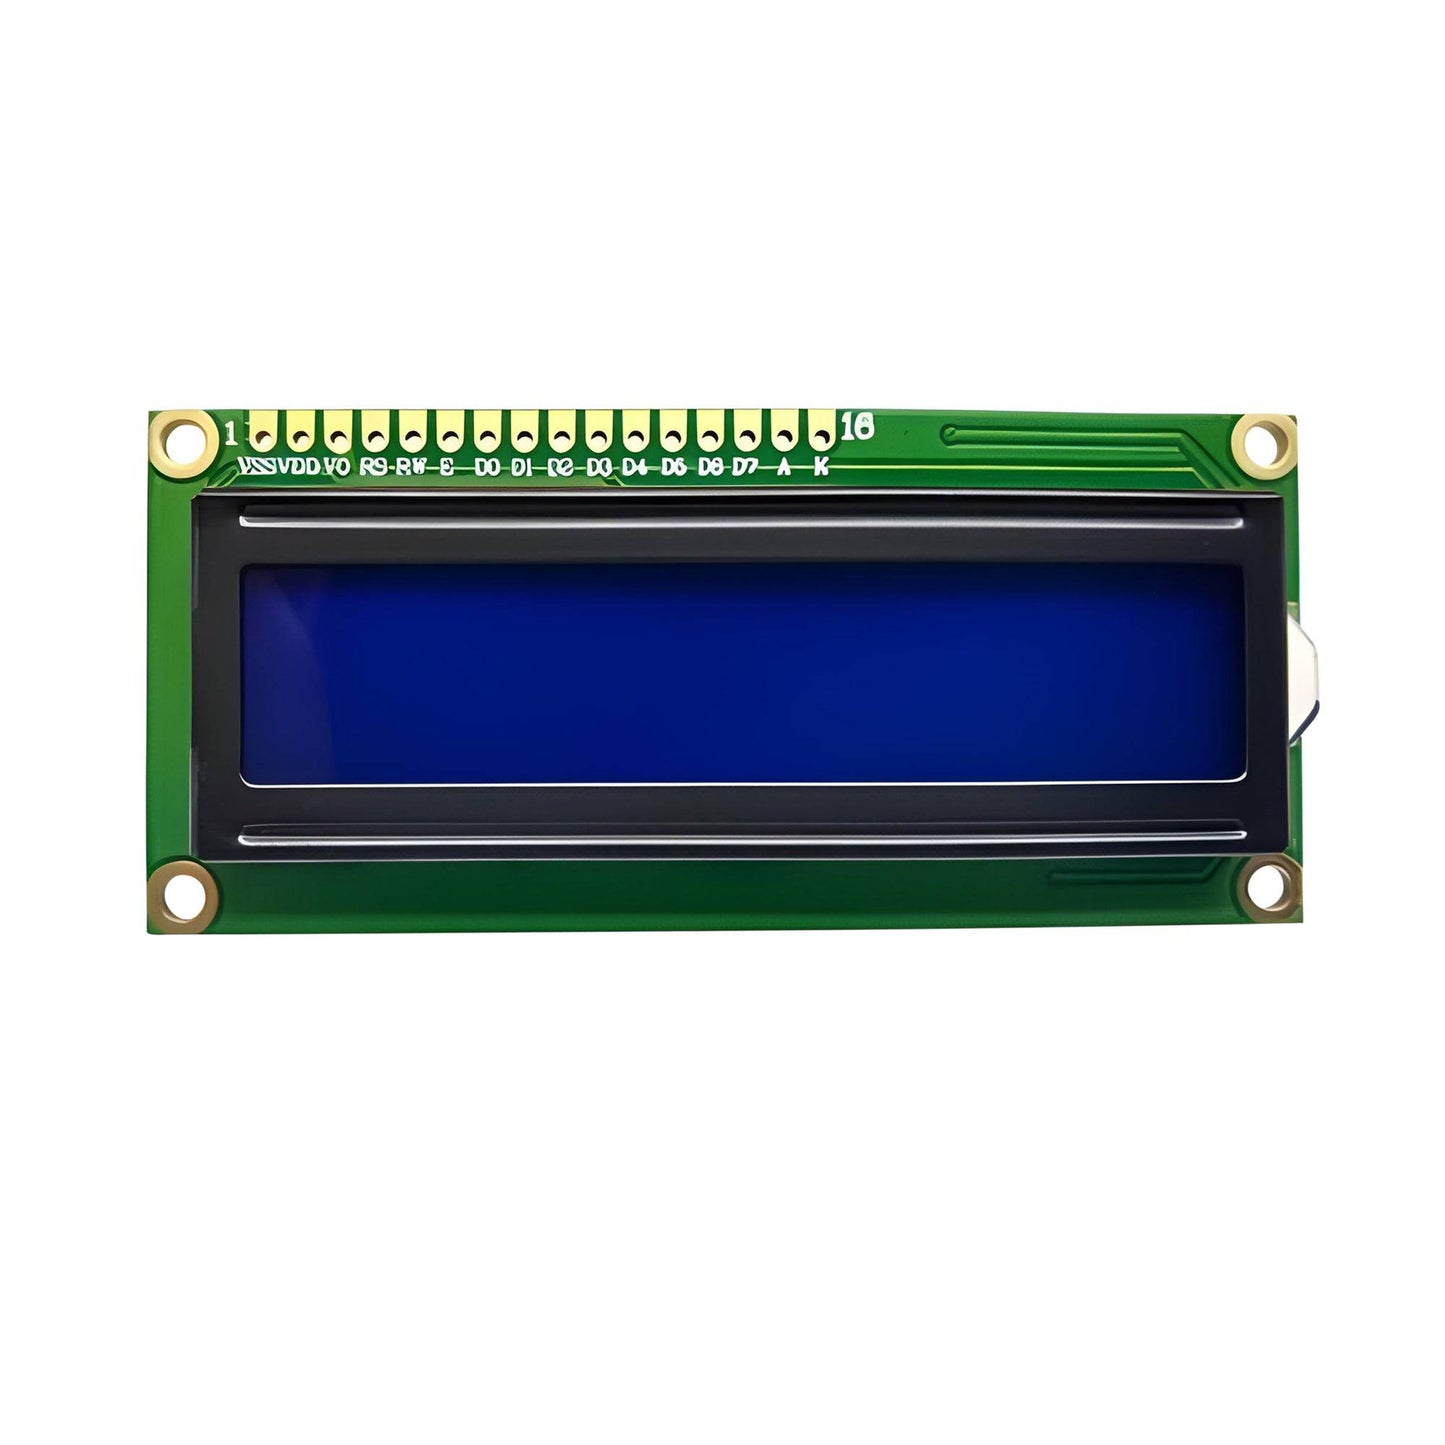 16x2 LCD Display Arduino Compatible (Blue Backlight)